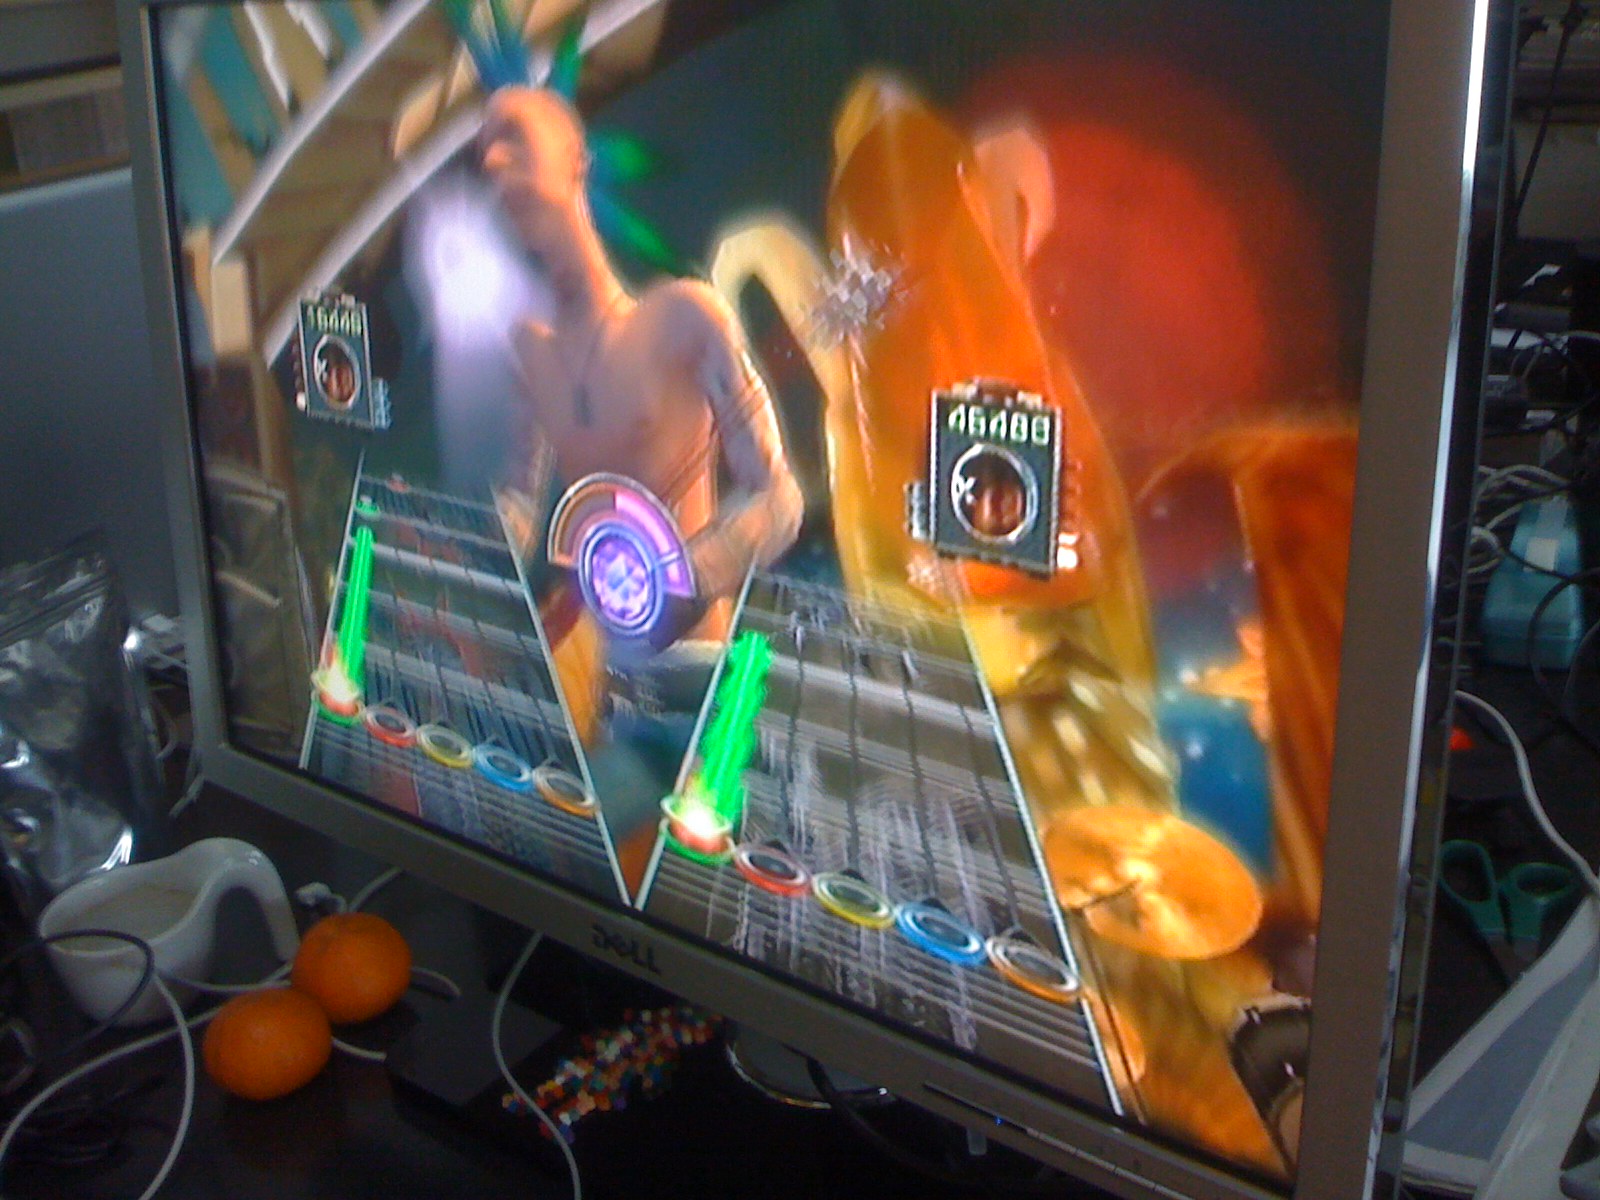 the guitar hero app is designed like this